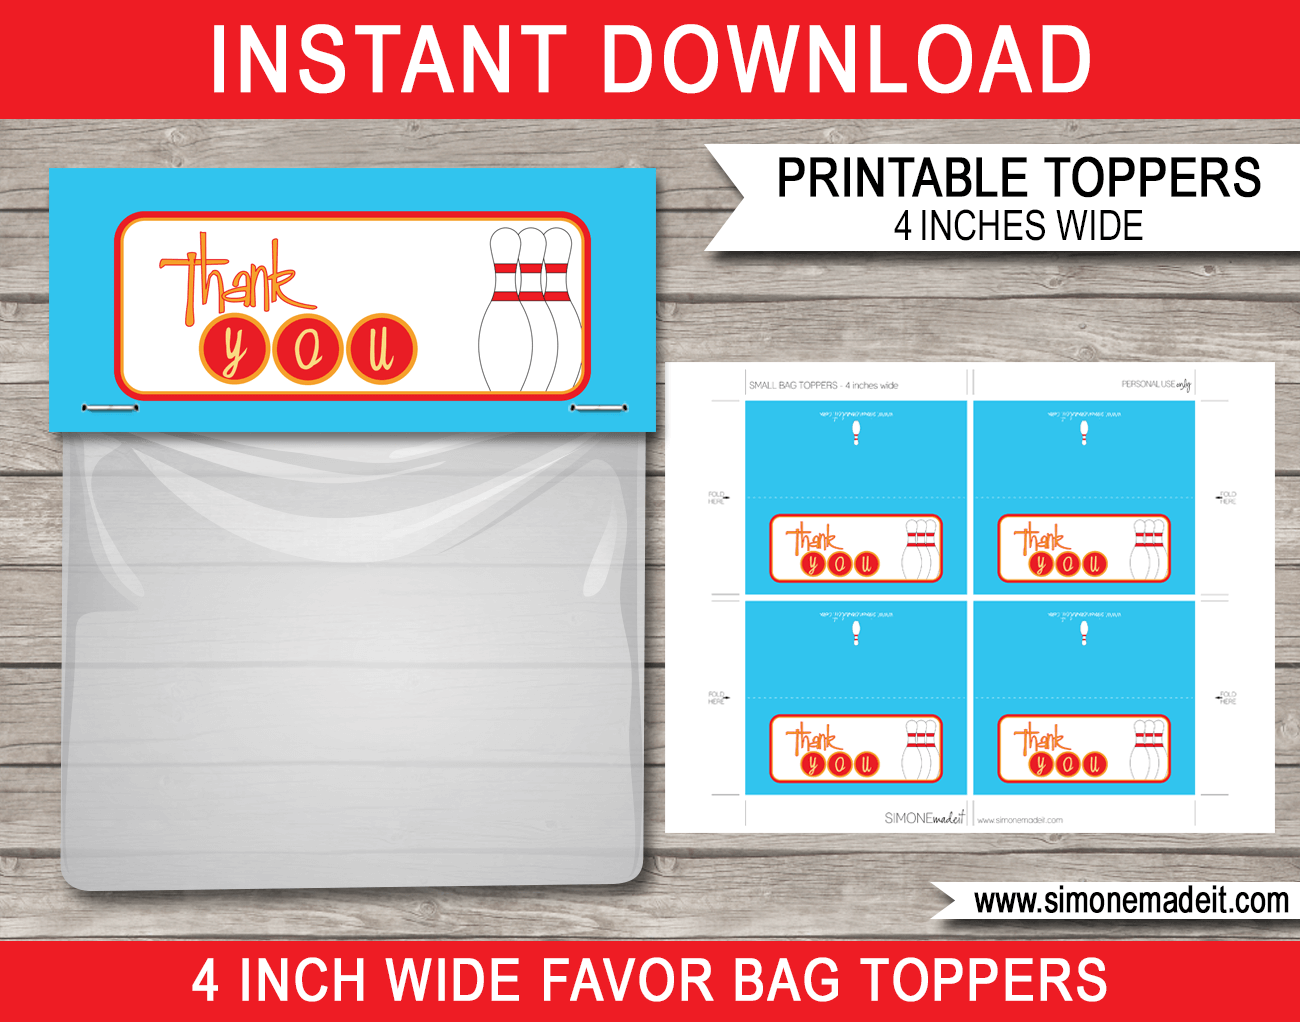 Bowling Birthday Party Favor Bag Toppers | Bowling Theme Birthday Party Favors | $3.00 INSTANT DOWNLOAD via SIMONEmadeit.com